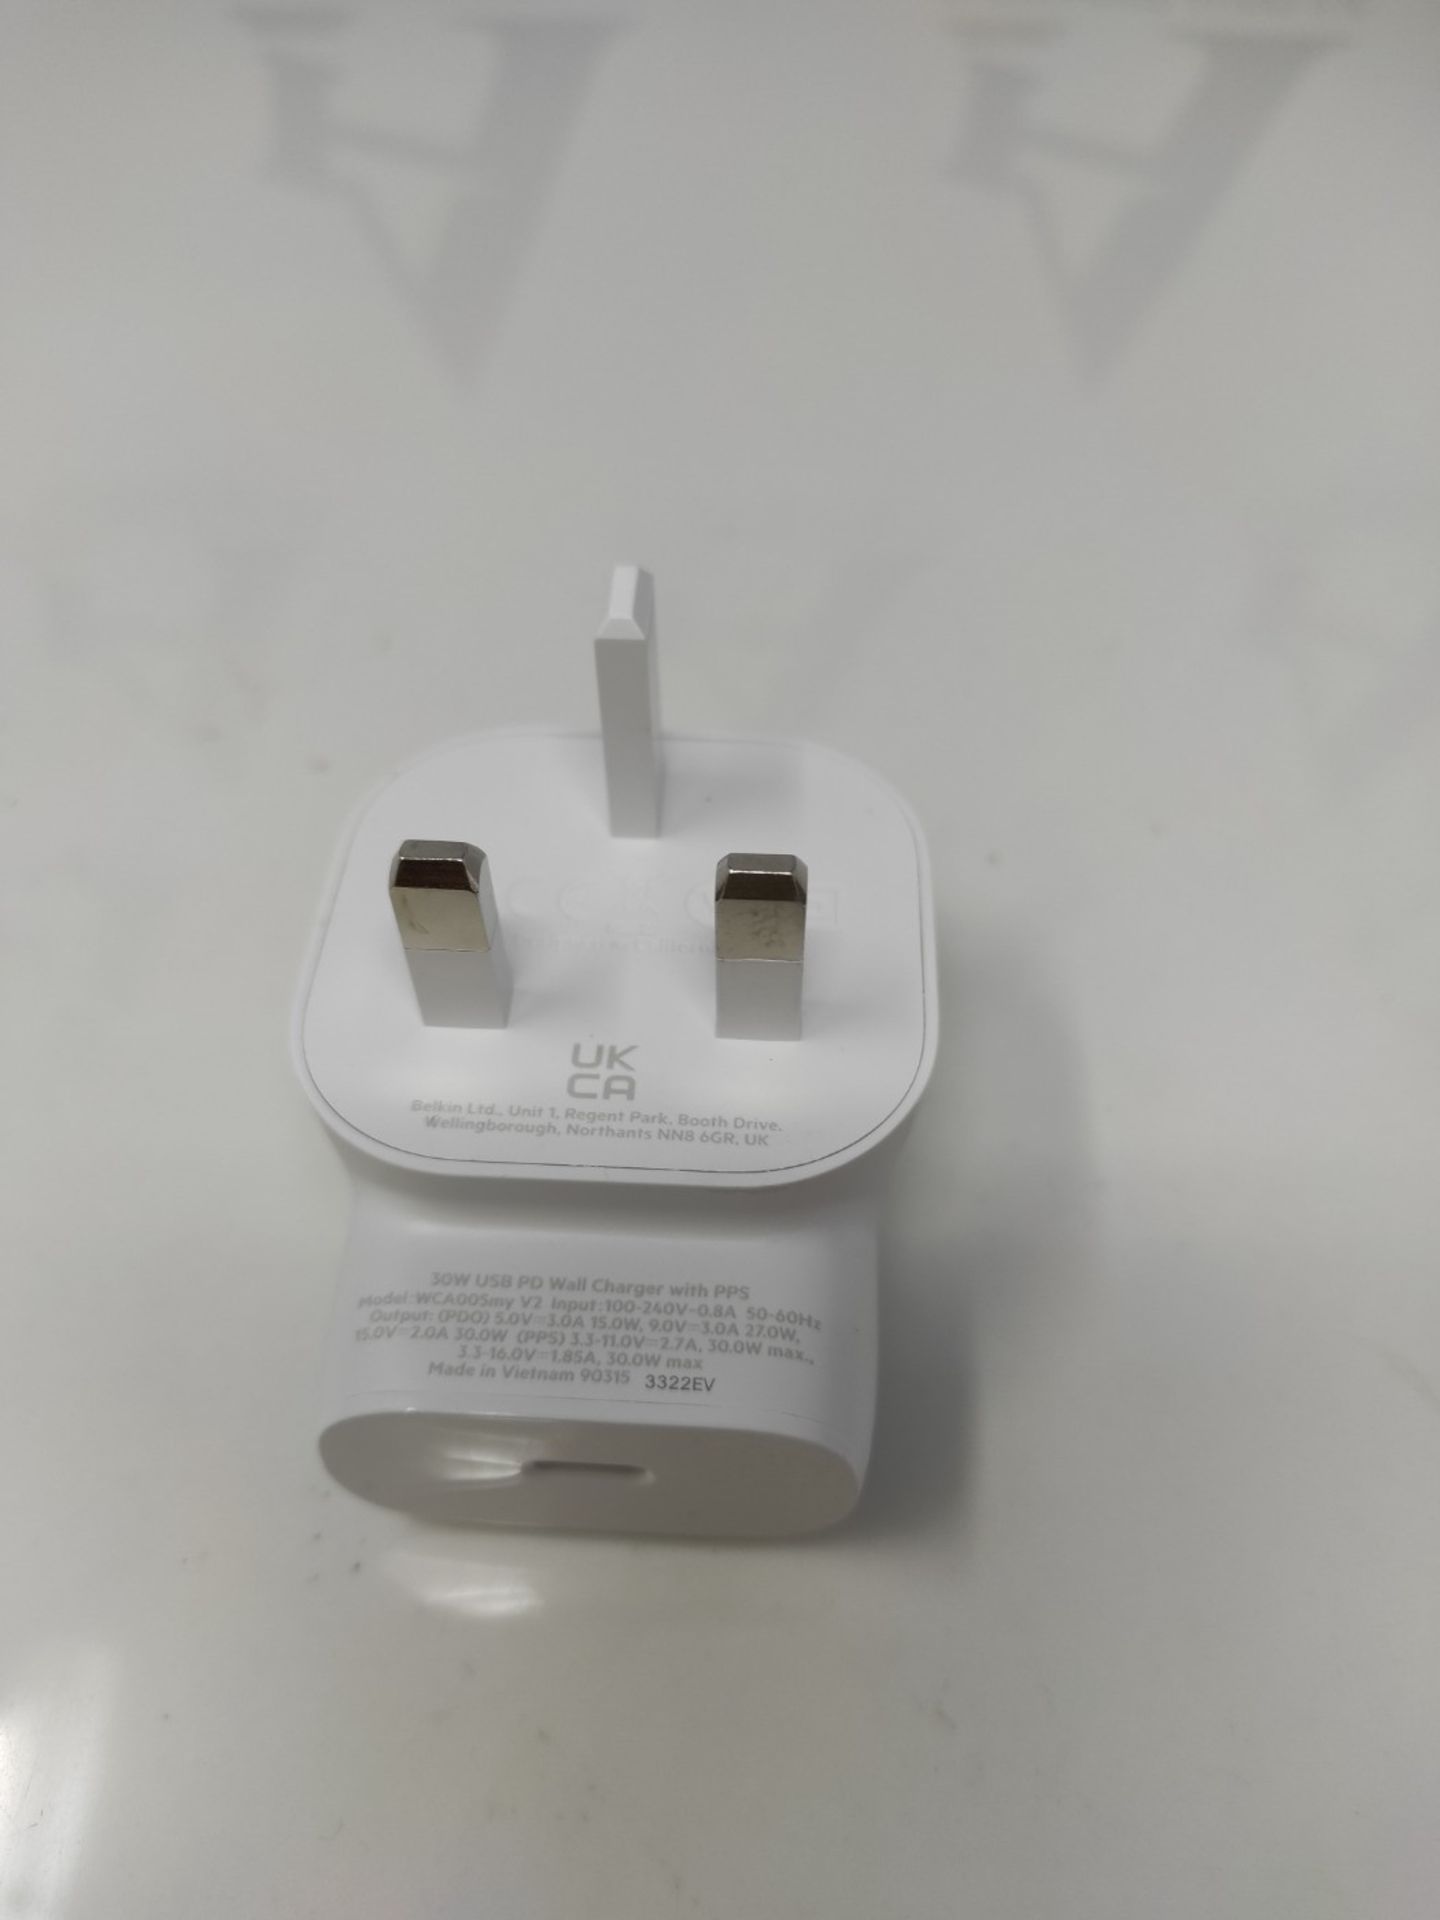 Belkin 30W USB C wall charger with PPS, Power Delivery, USB-IF certified PD 3.0, fast - Image 2 of 2